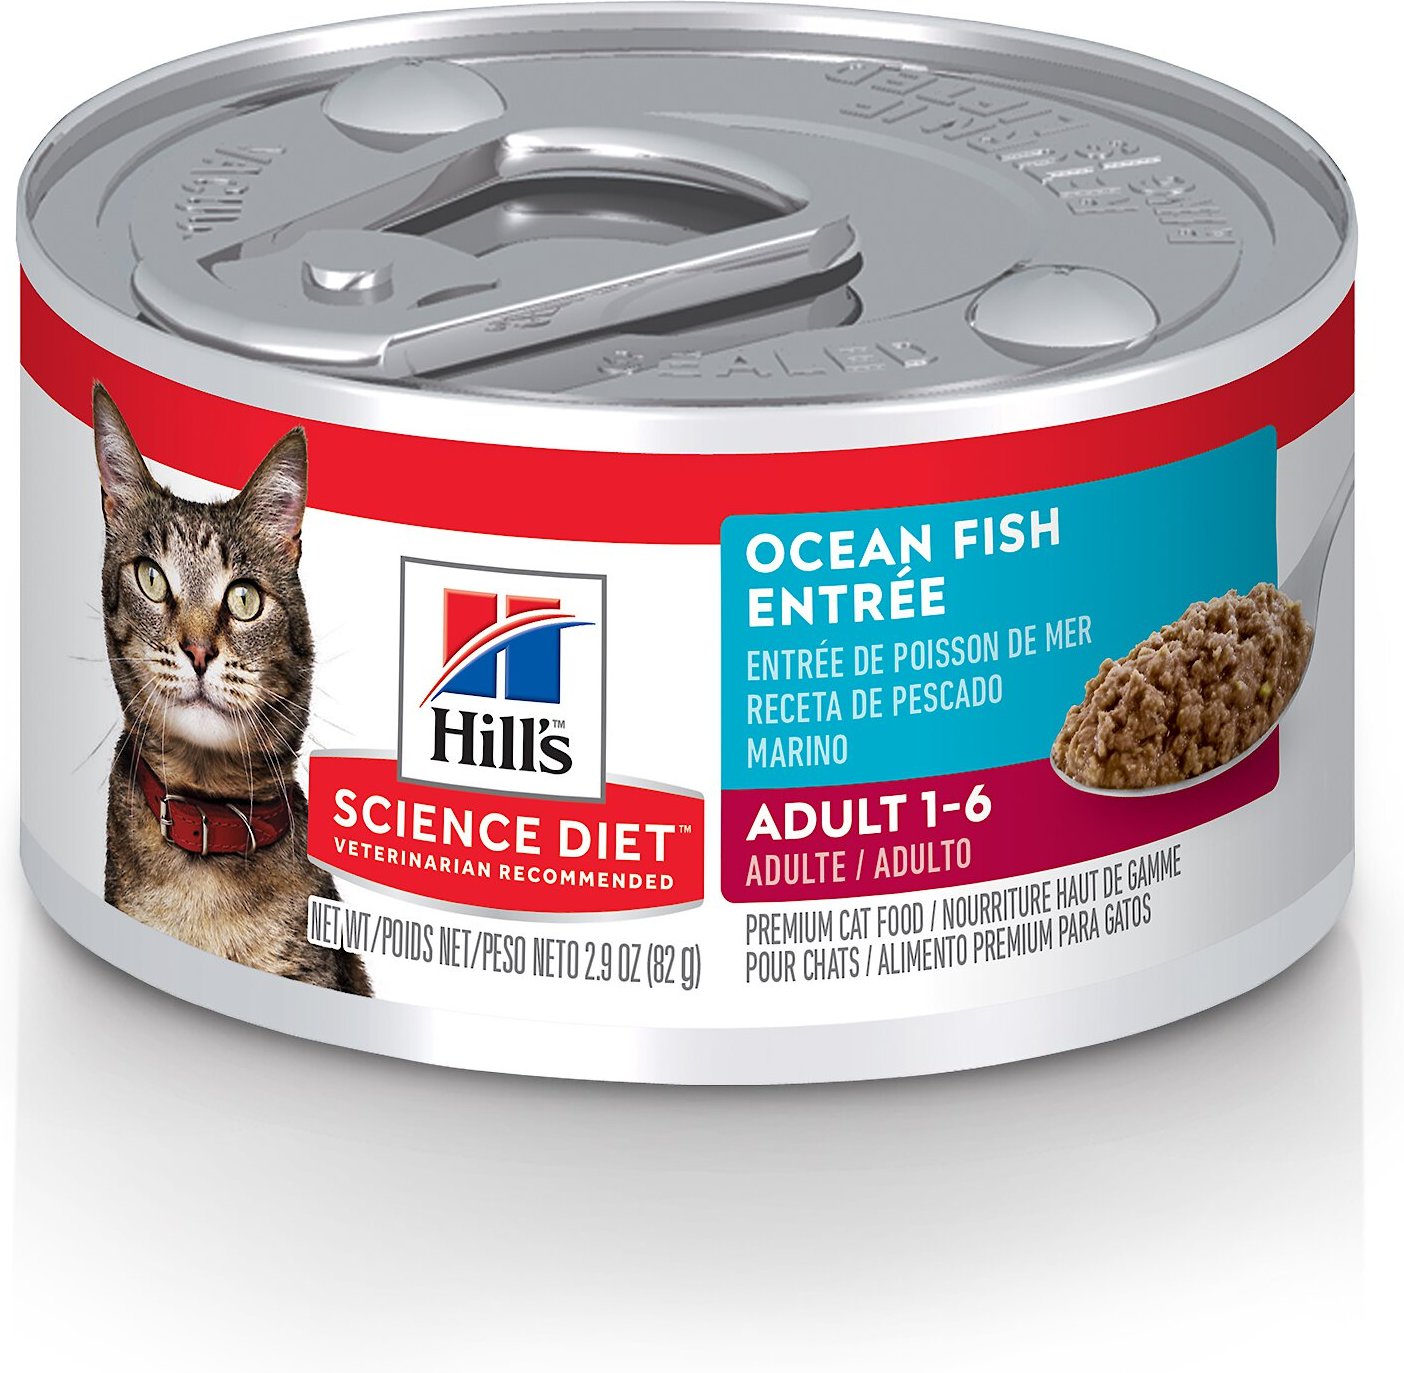 HILL'S SCIENCE DIET Adult Ocean Fish Entree Canned Cat Food, 2.9oz